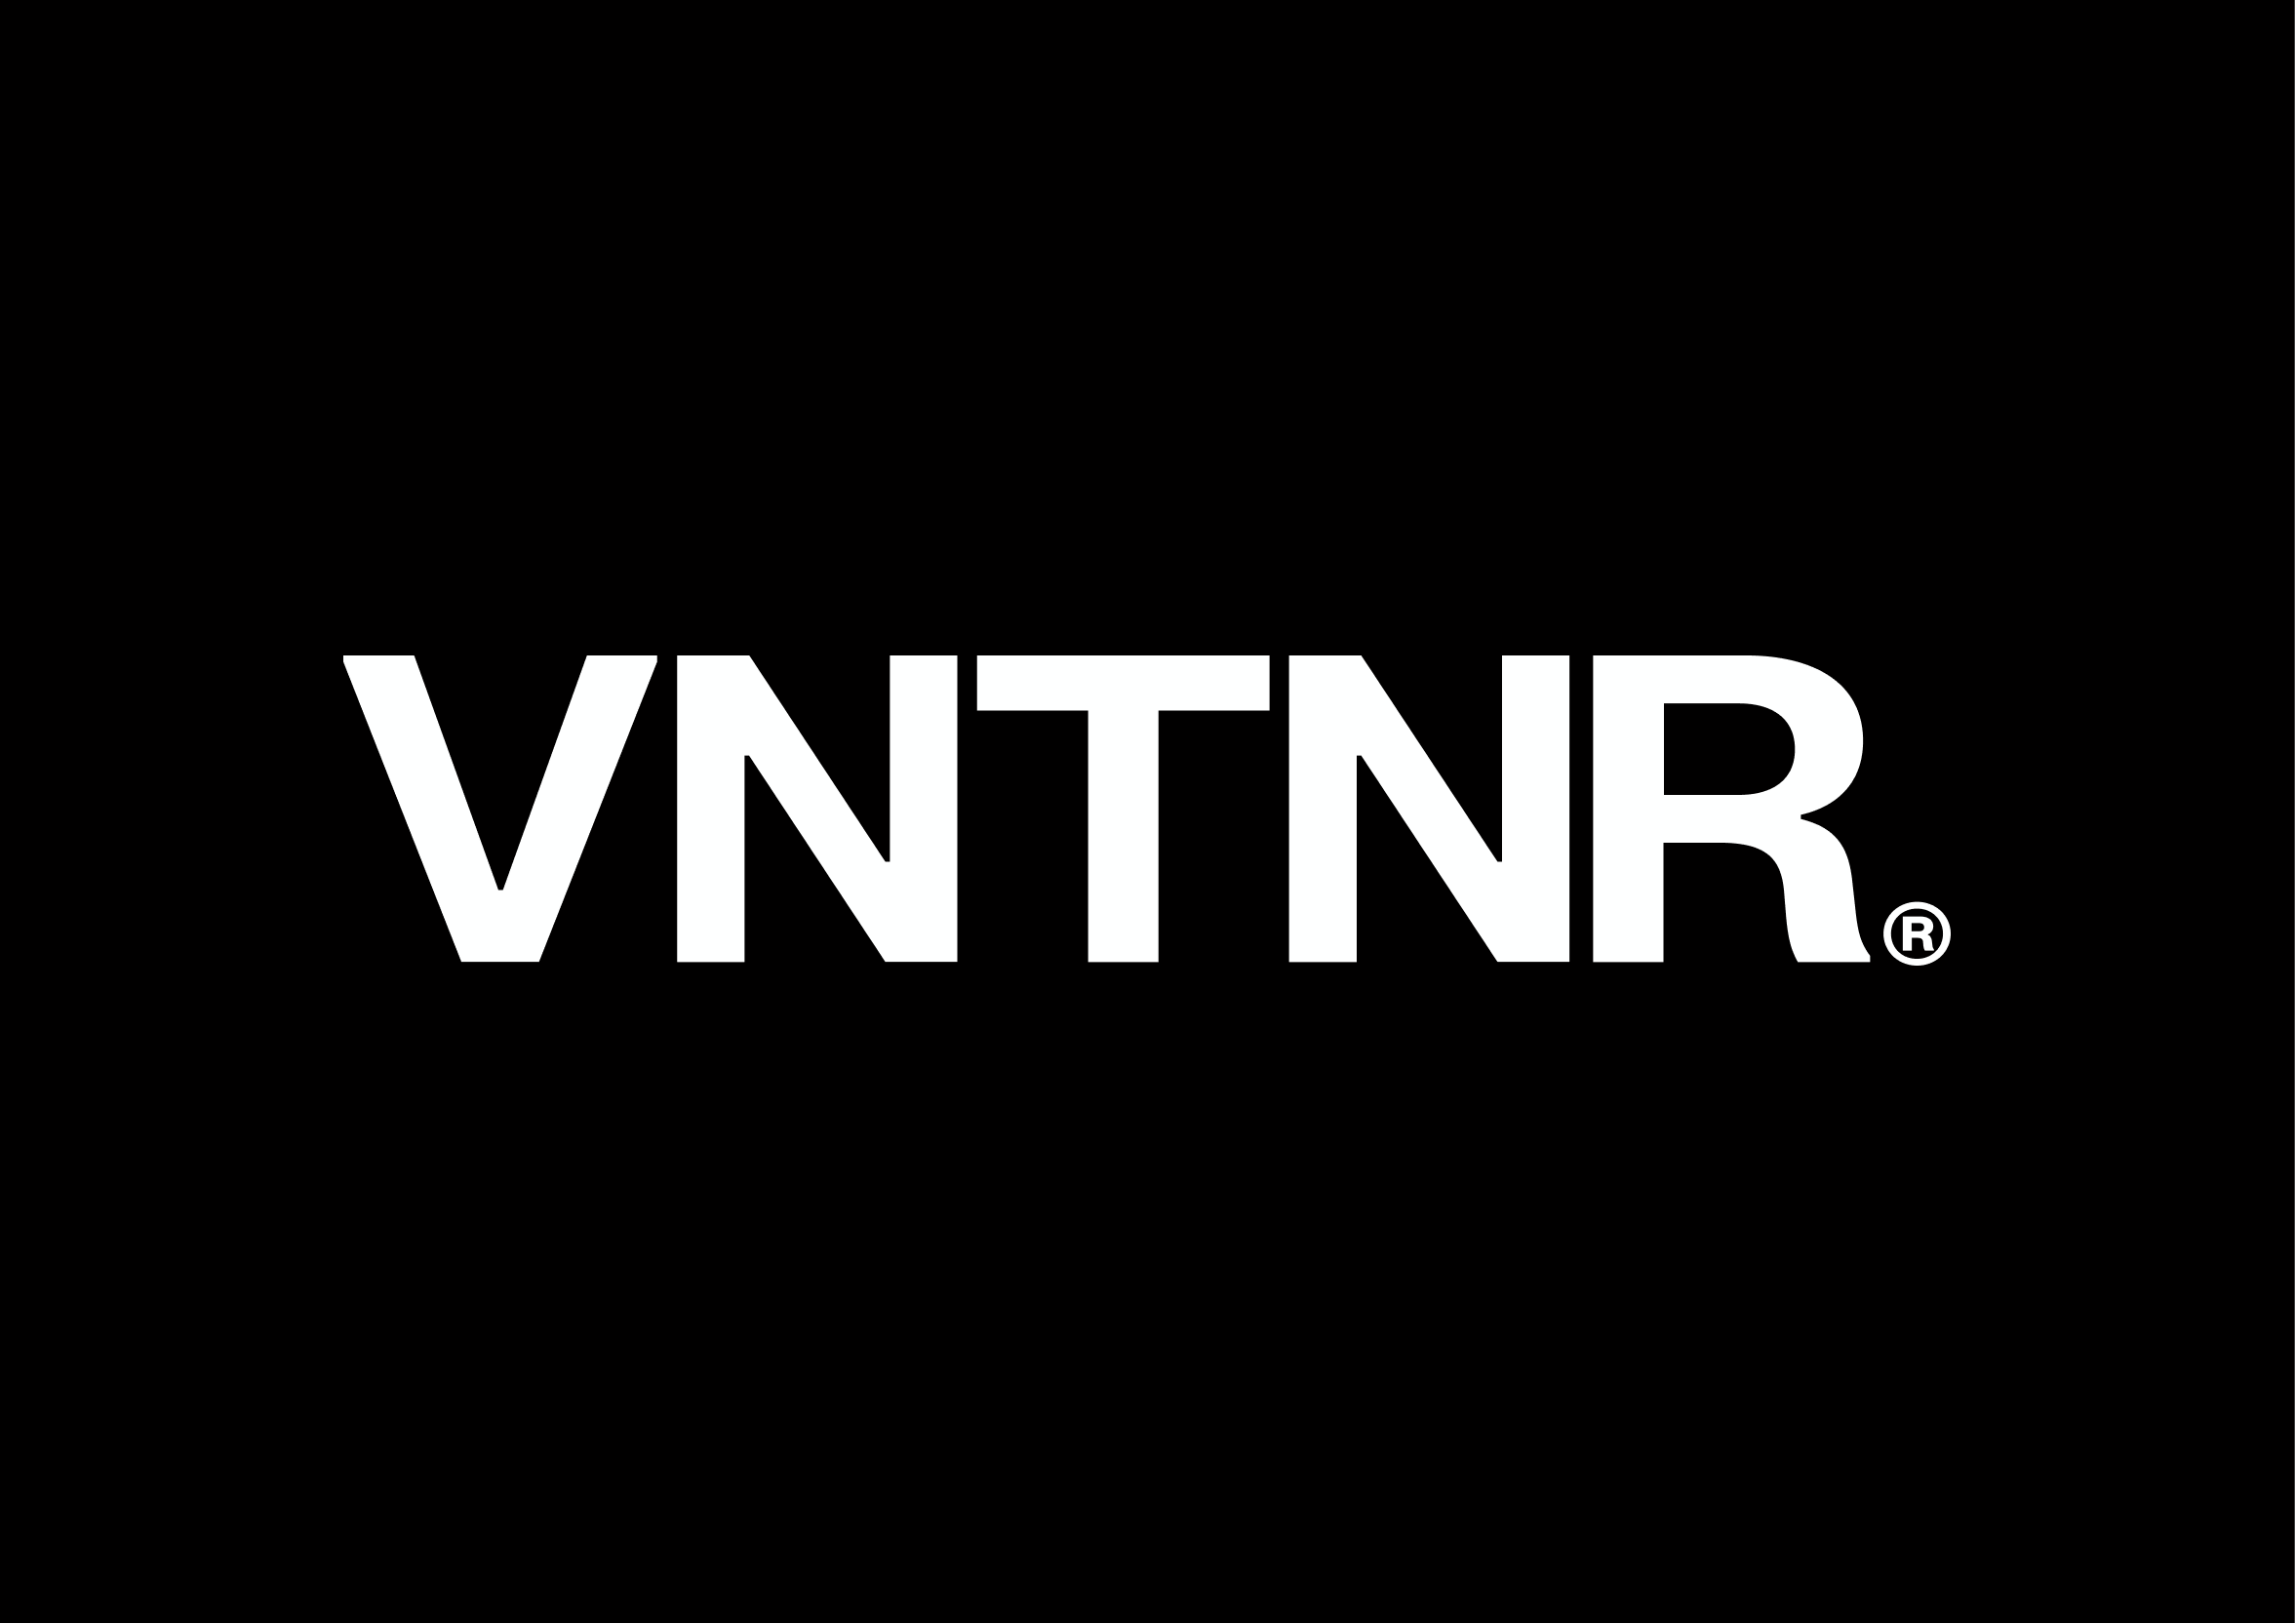 VNTNR logo in white text on a black background